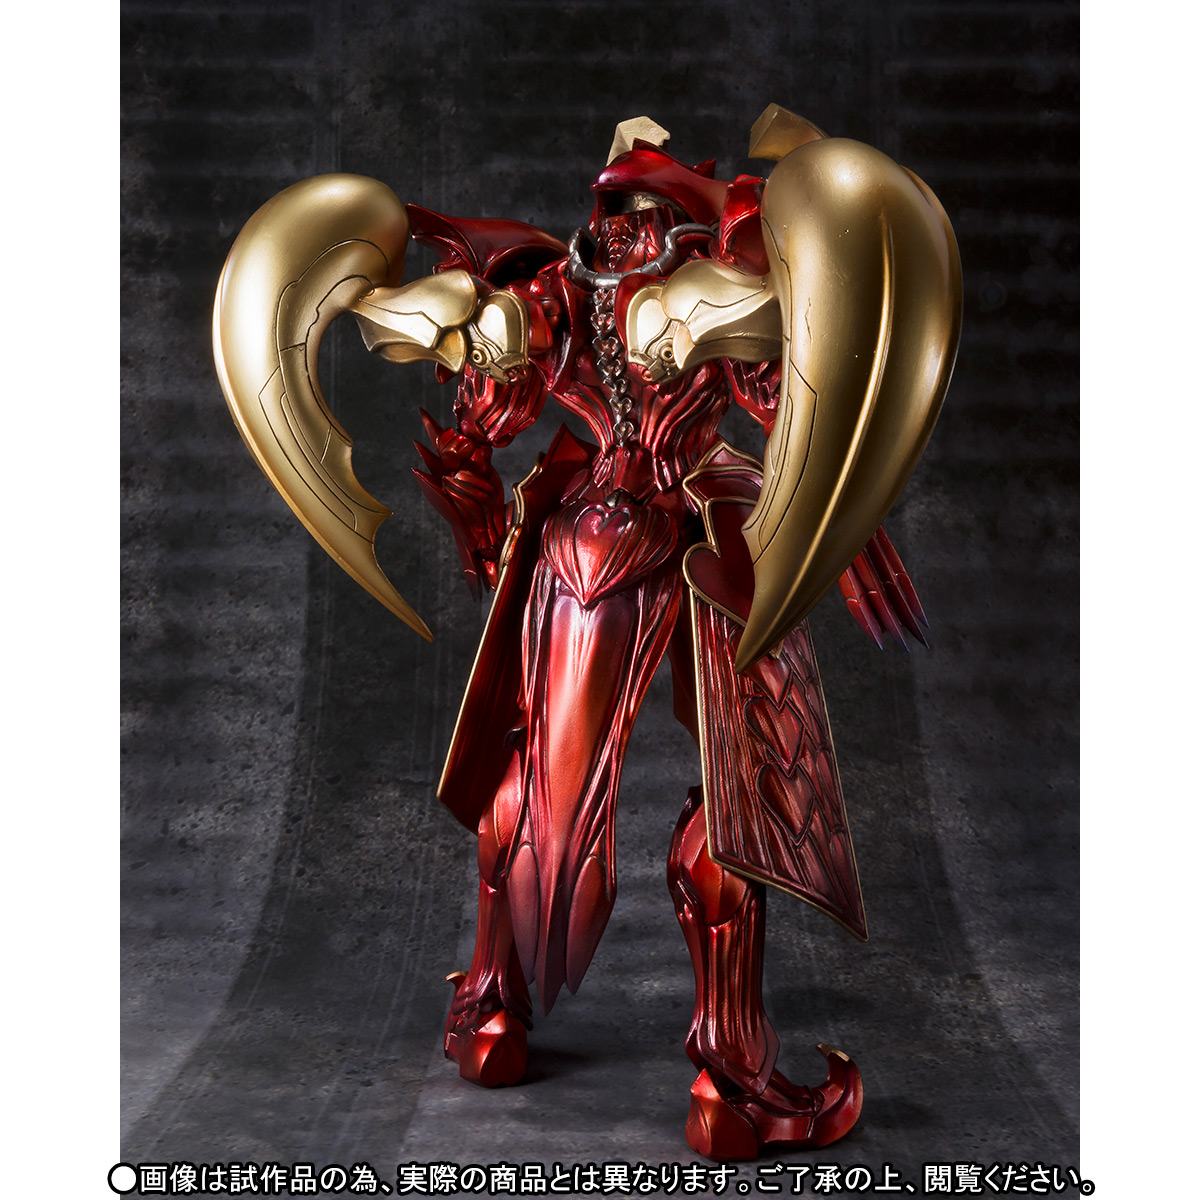 S.I.C. Heart Roidmude & S.H. Figuarts ZX Helldiver Official Images 